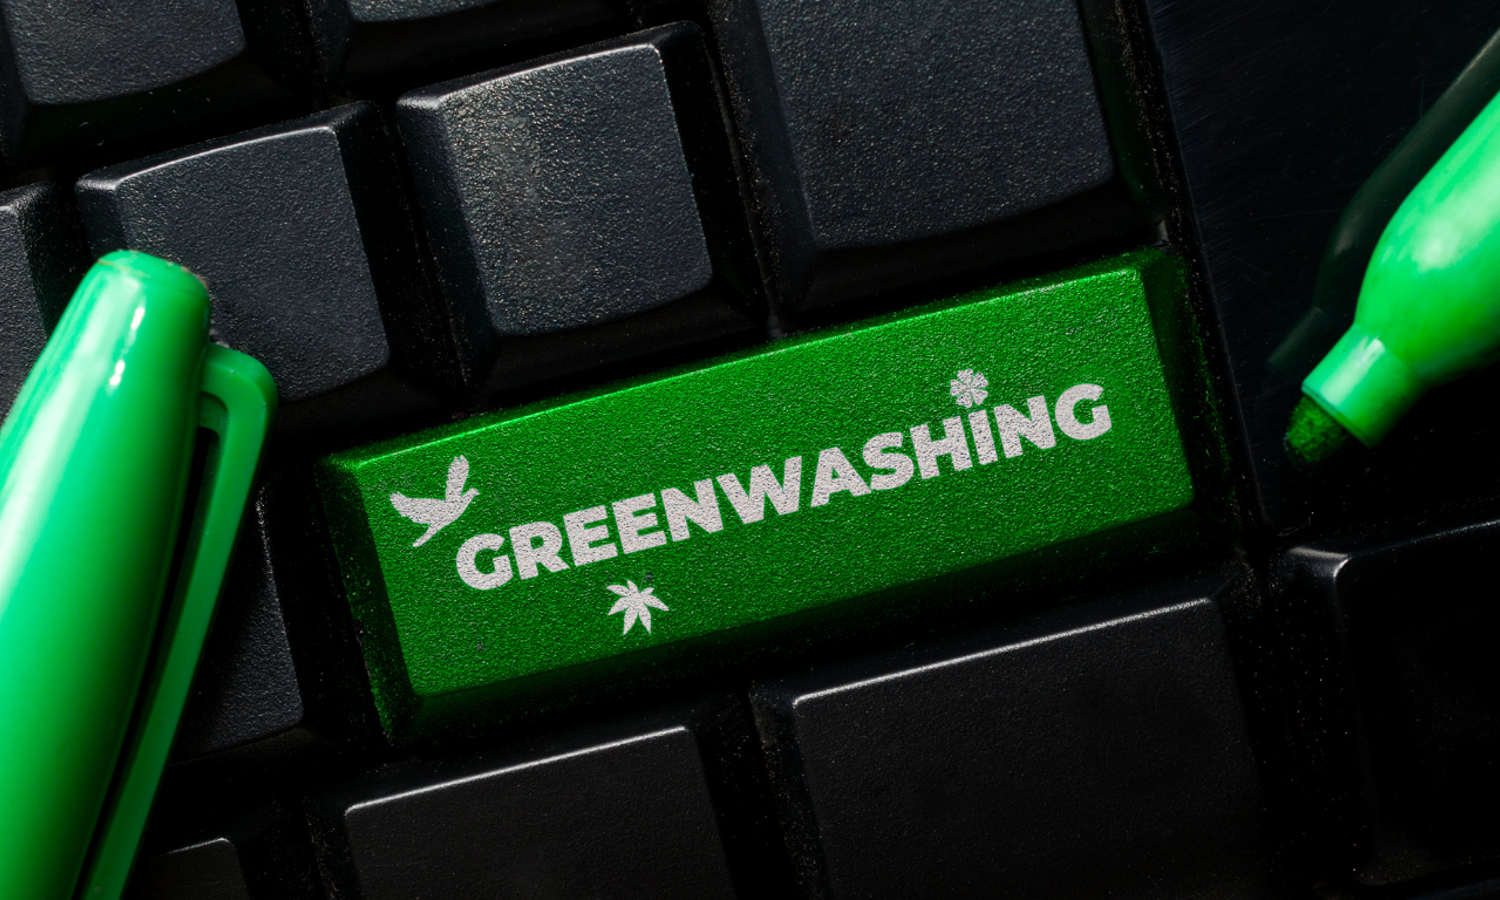 How are companies affected by greenwashing?